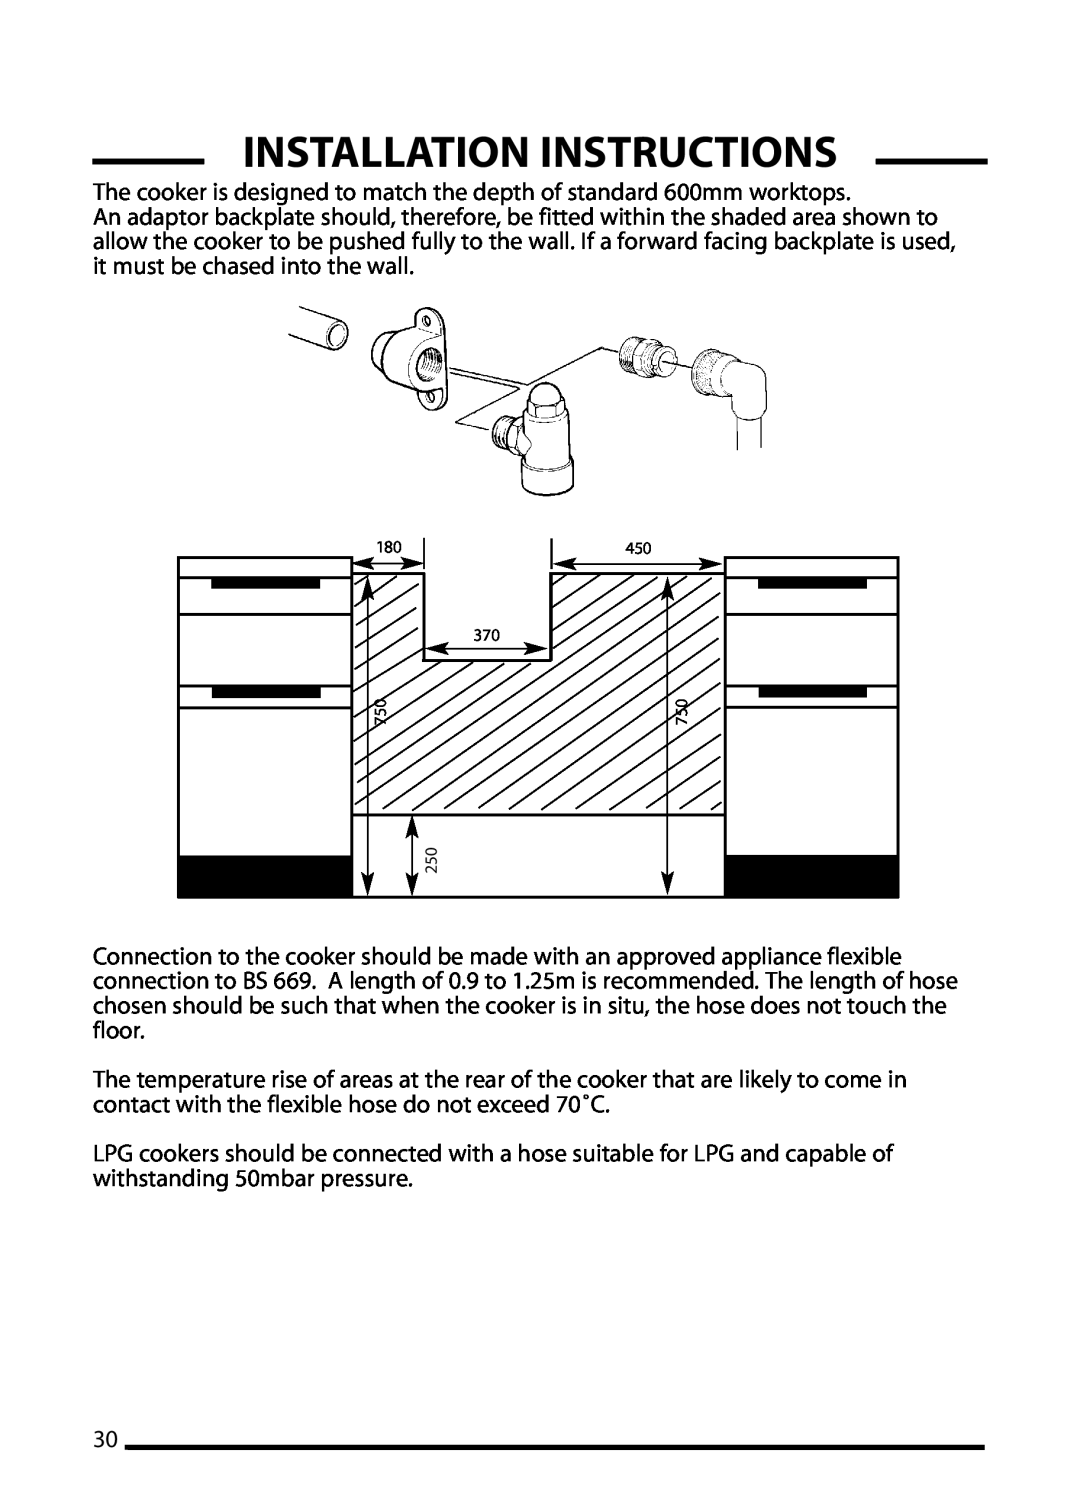 Cannon 10855G, 10850G Installation Instructions, The cooker is designed to match the depth of standard 600mm worktops 